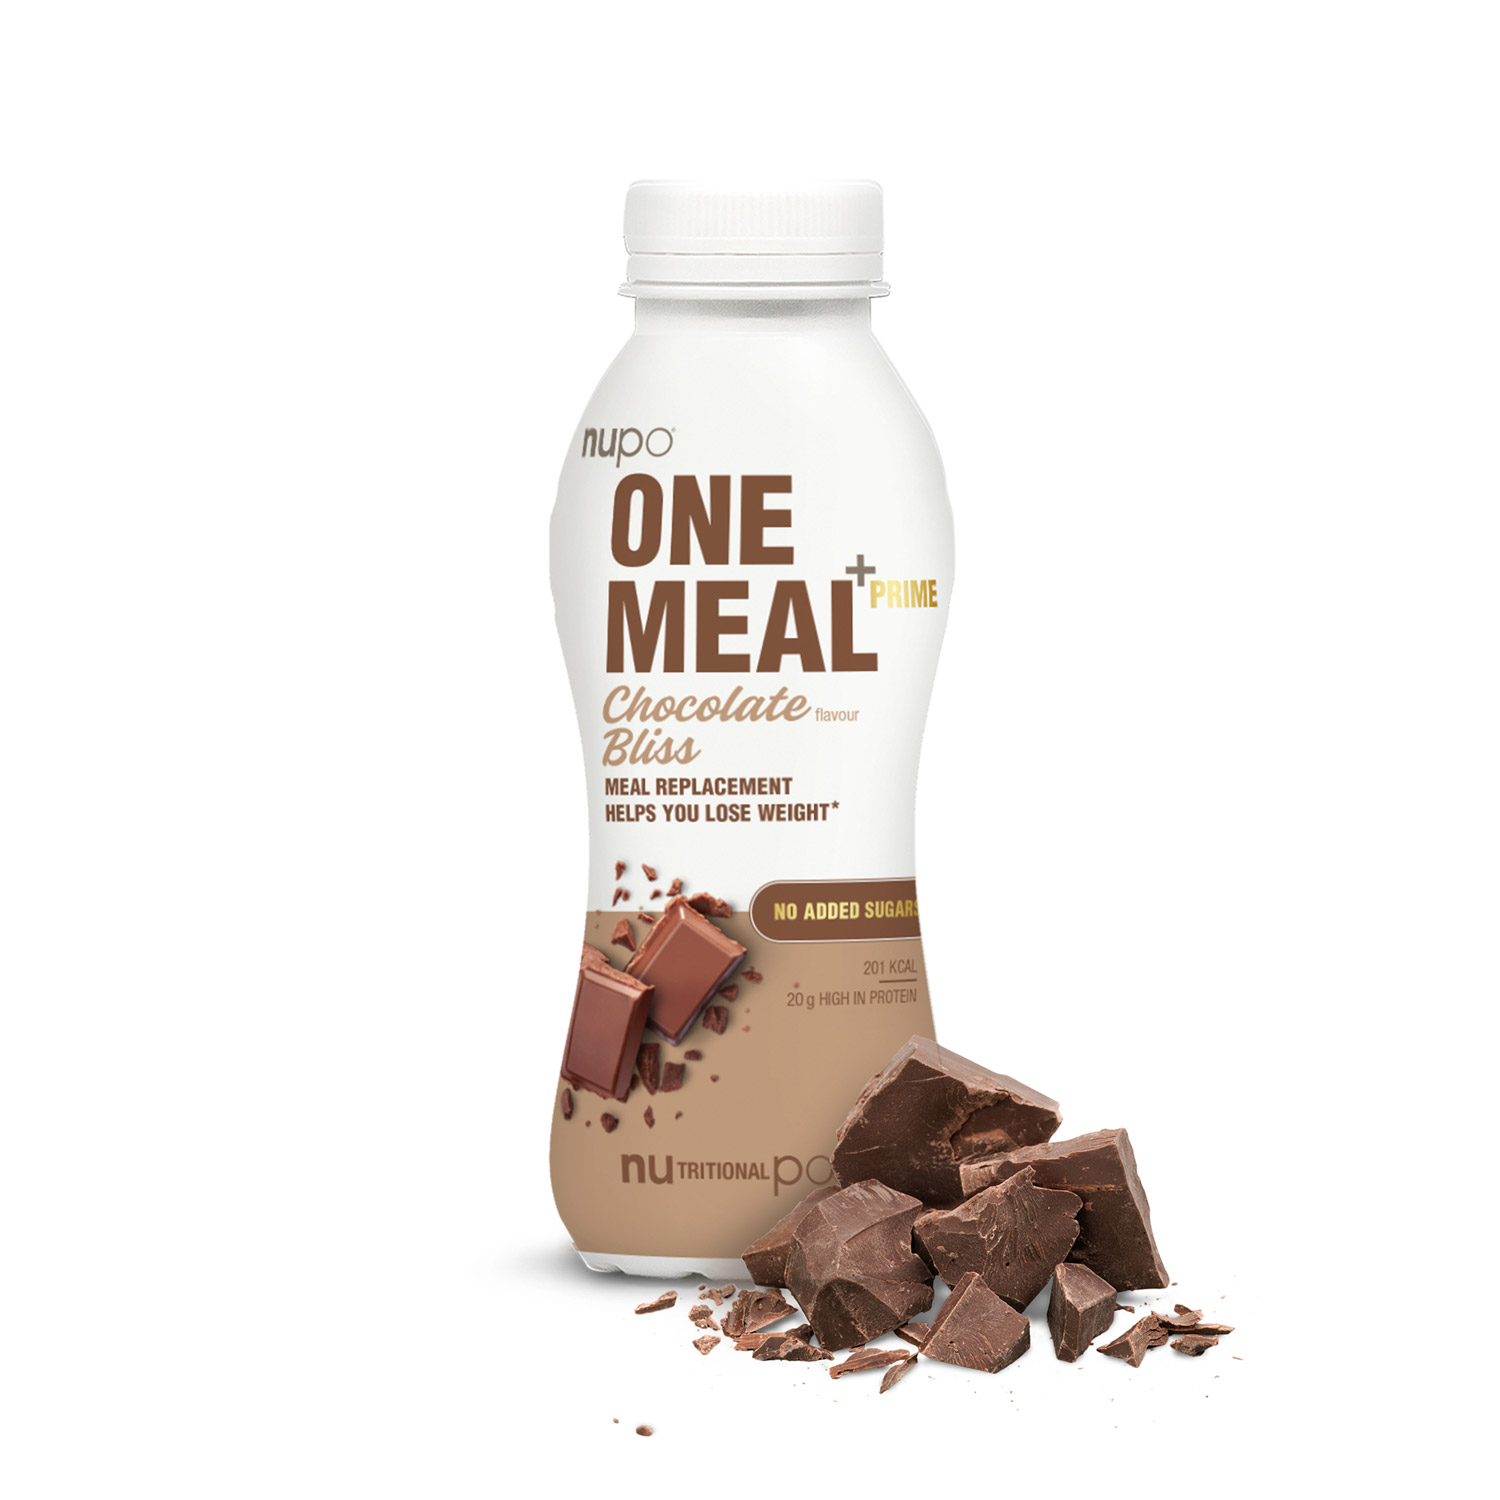 Nupo One Meal +Prime Shake  Chocolate Bliss 330ml Nupo